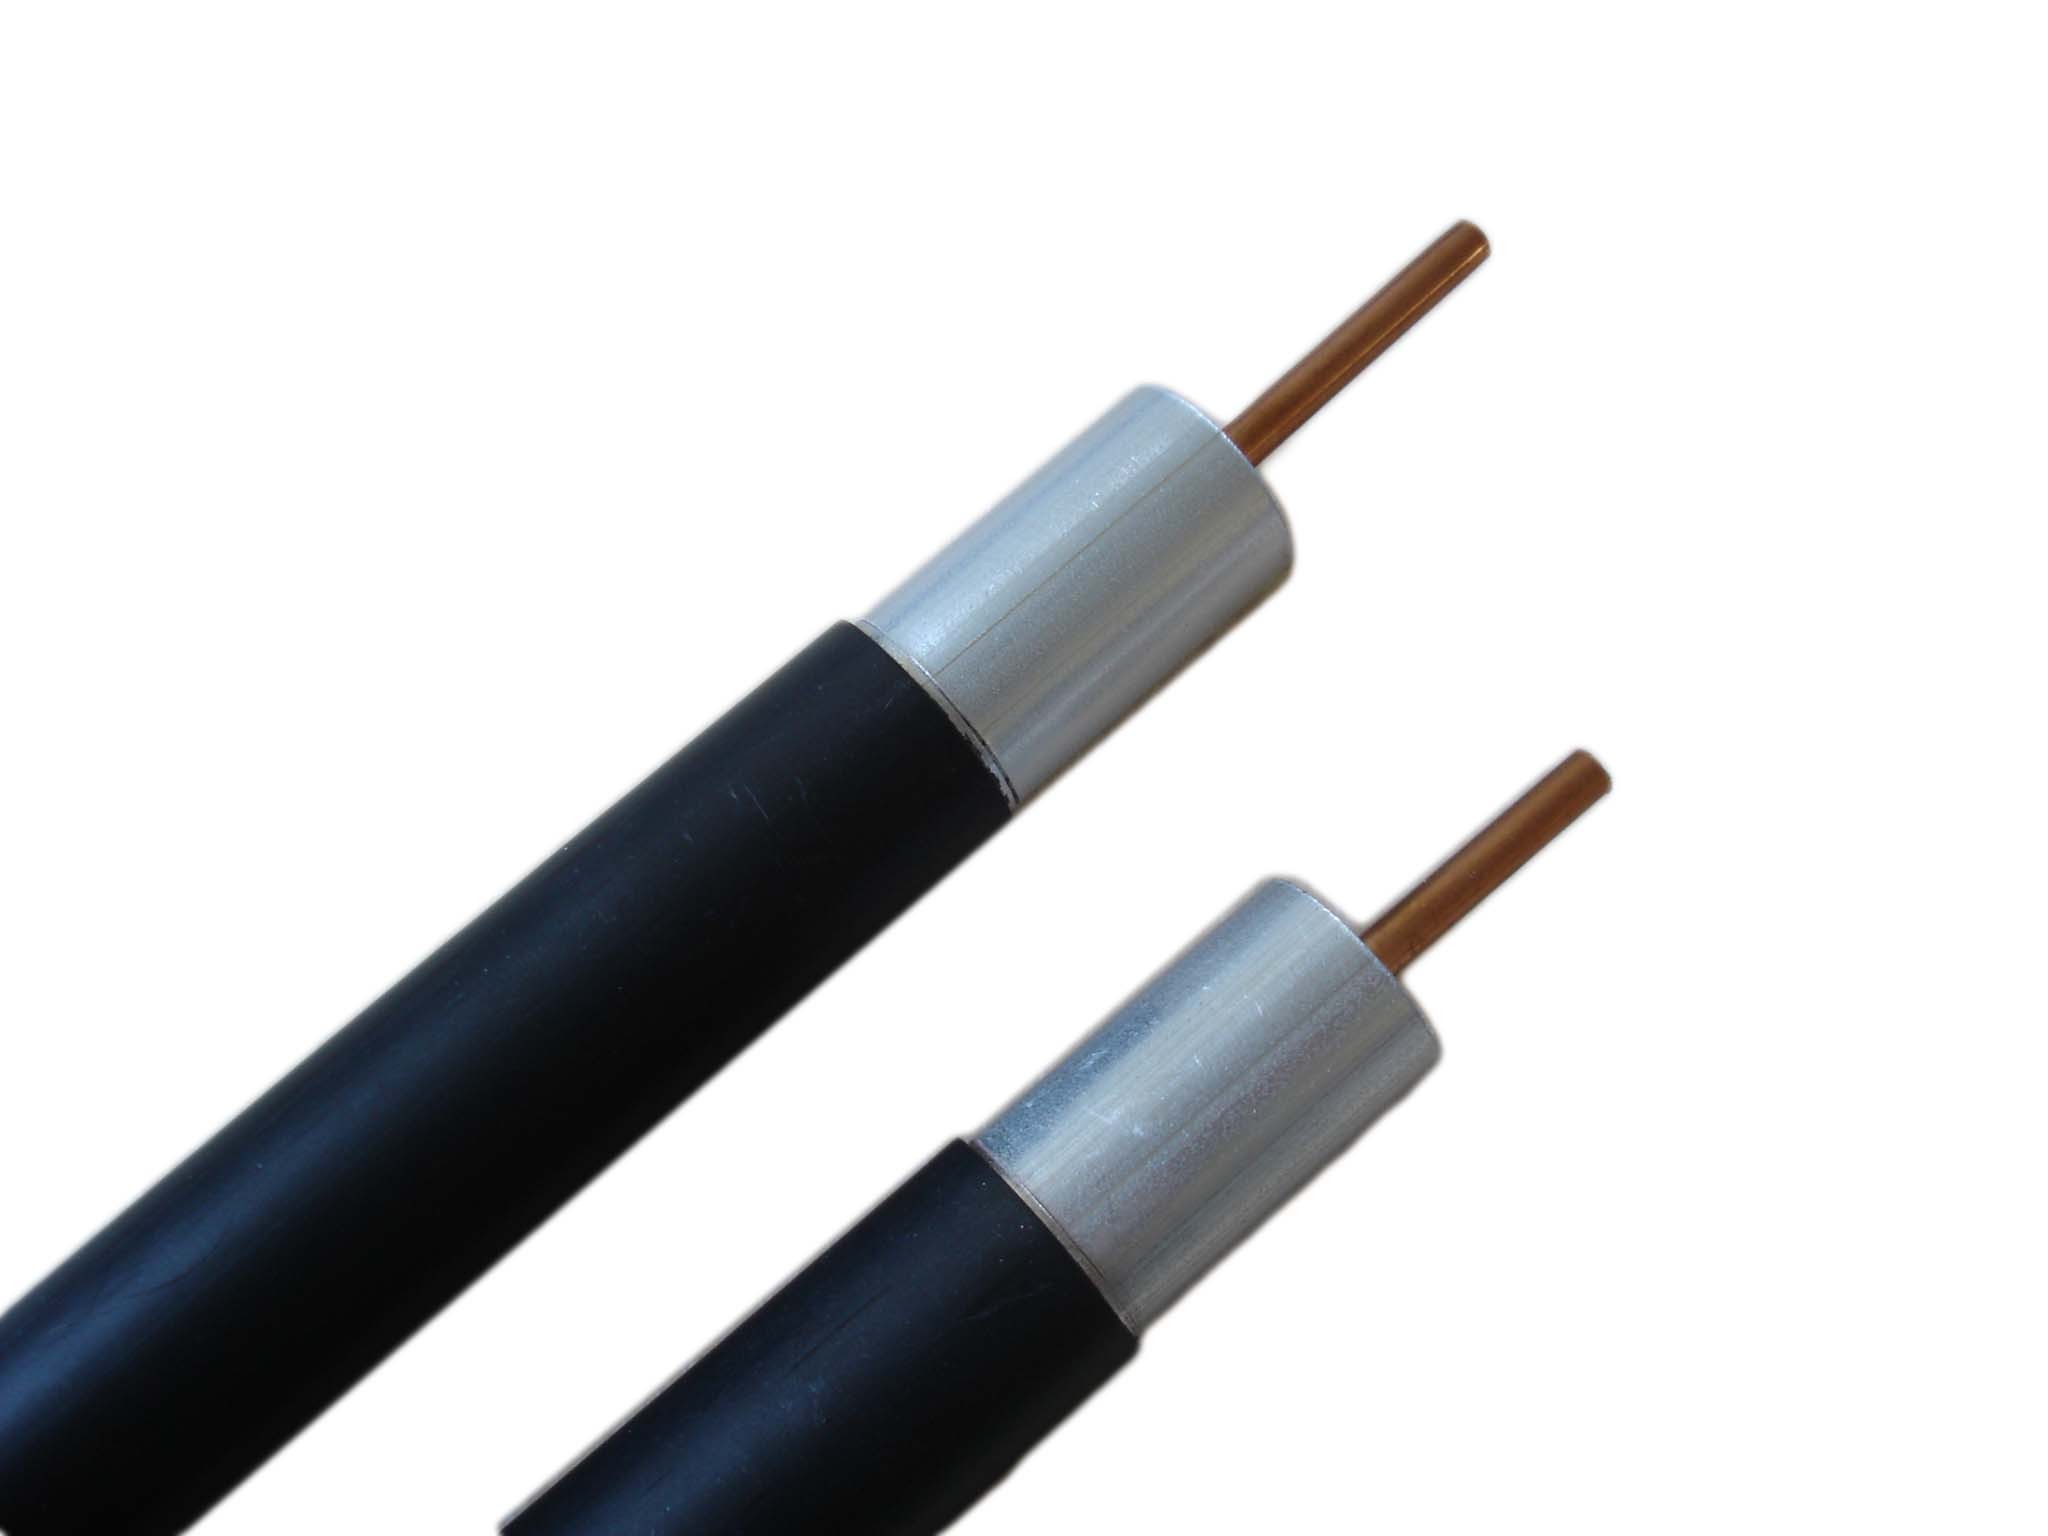  Aluminum Tube Trunk Cable 500 PE Jacket SCTE  Feeder and Distribution Cable Manufactures